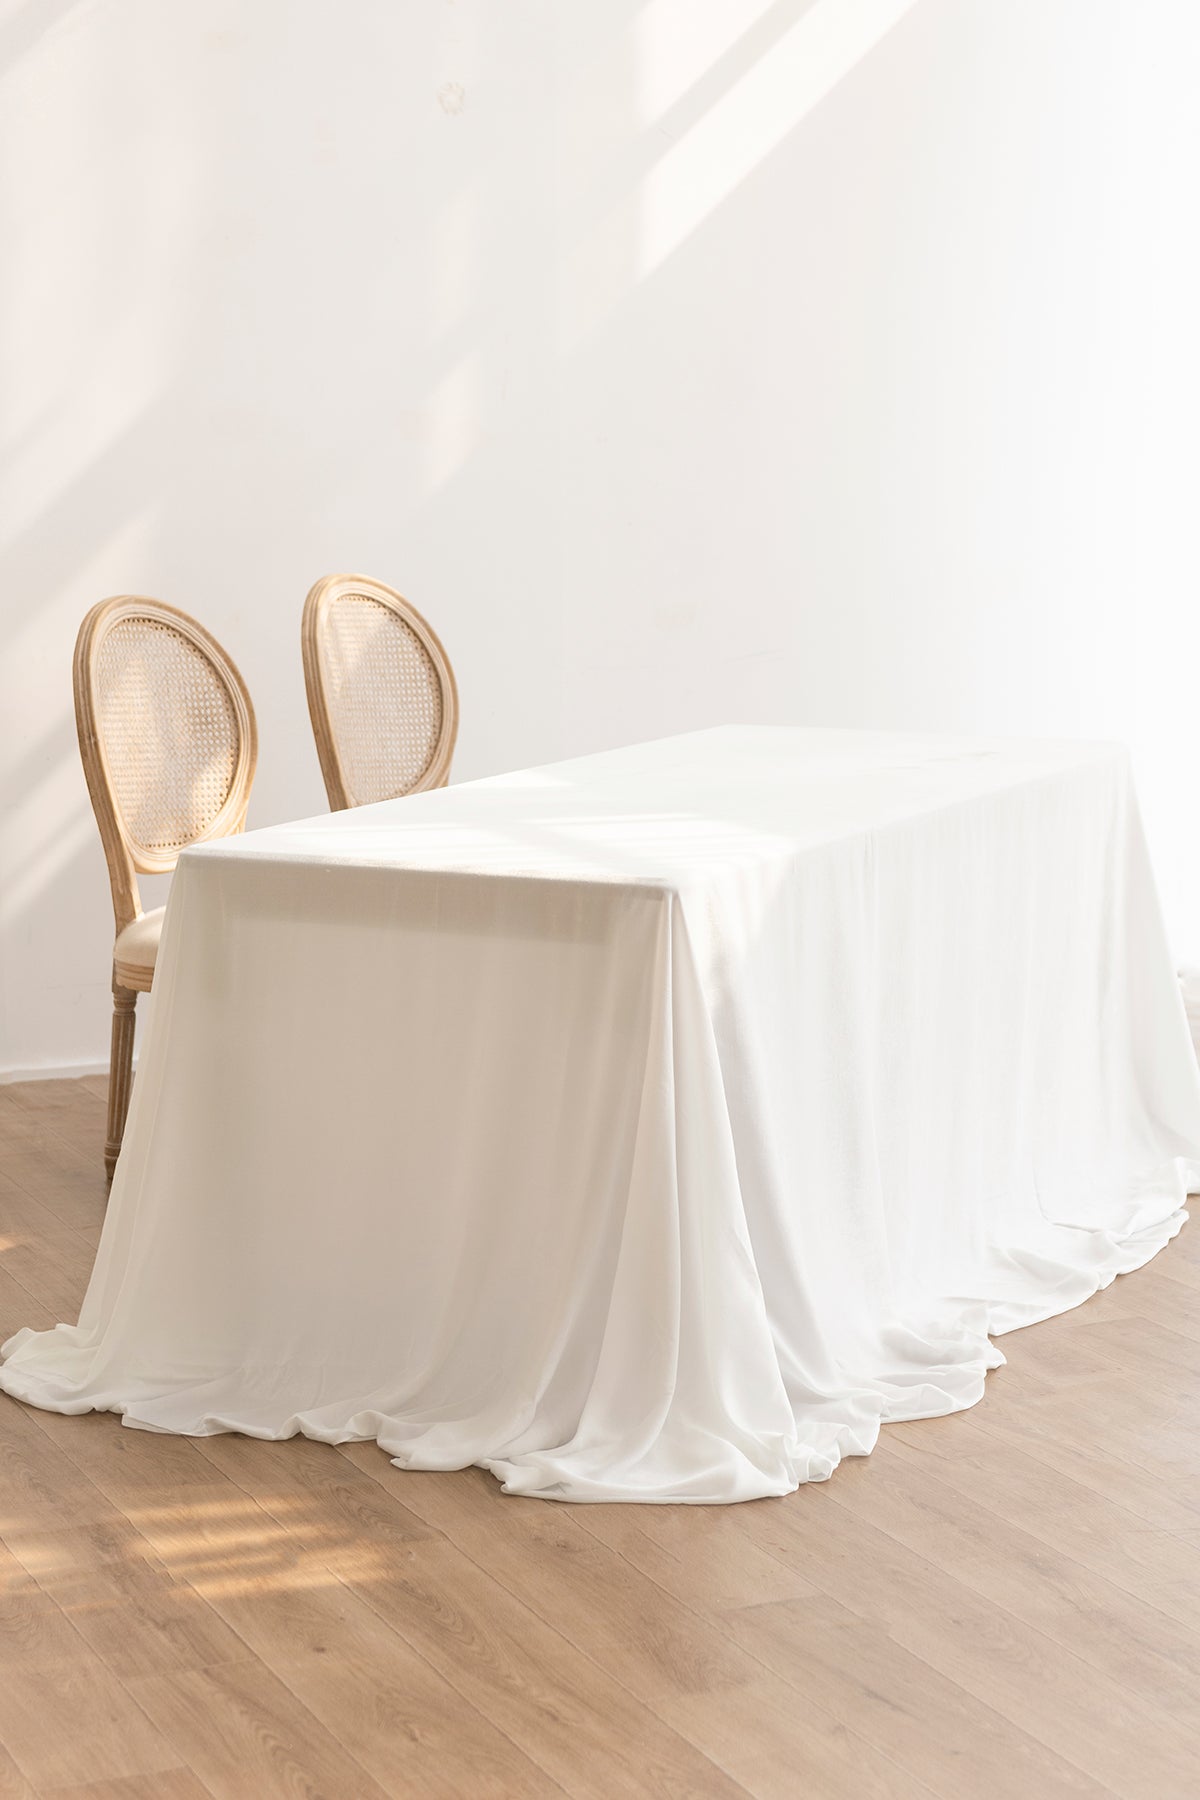 Table Linens in Emerald & Tawny Beige